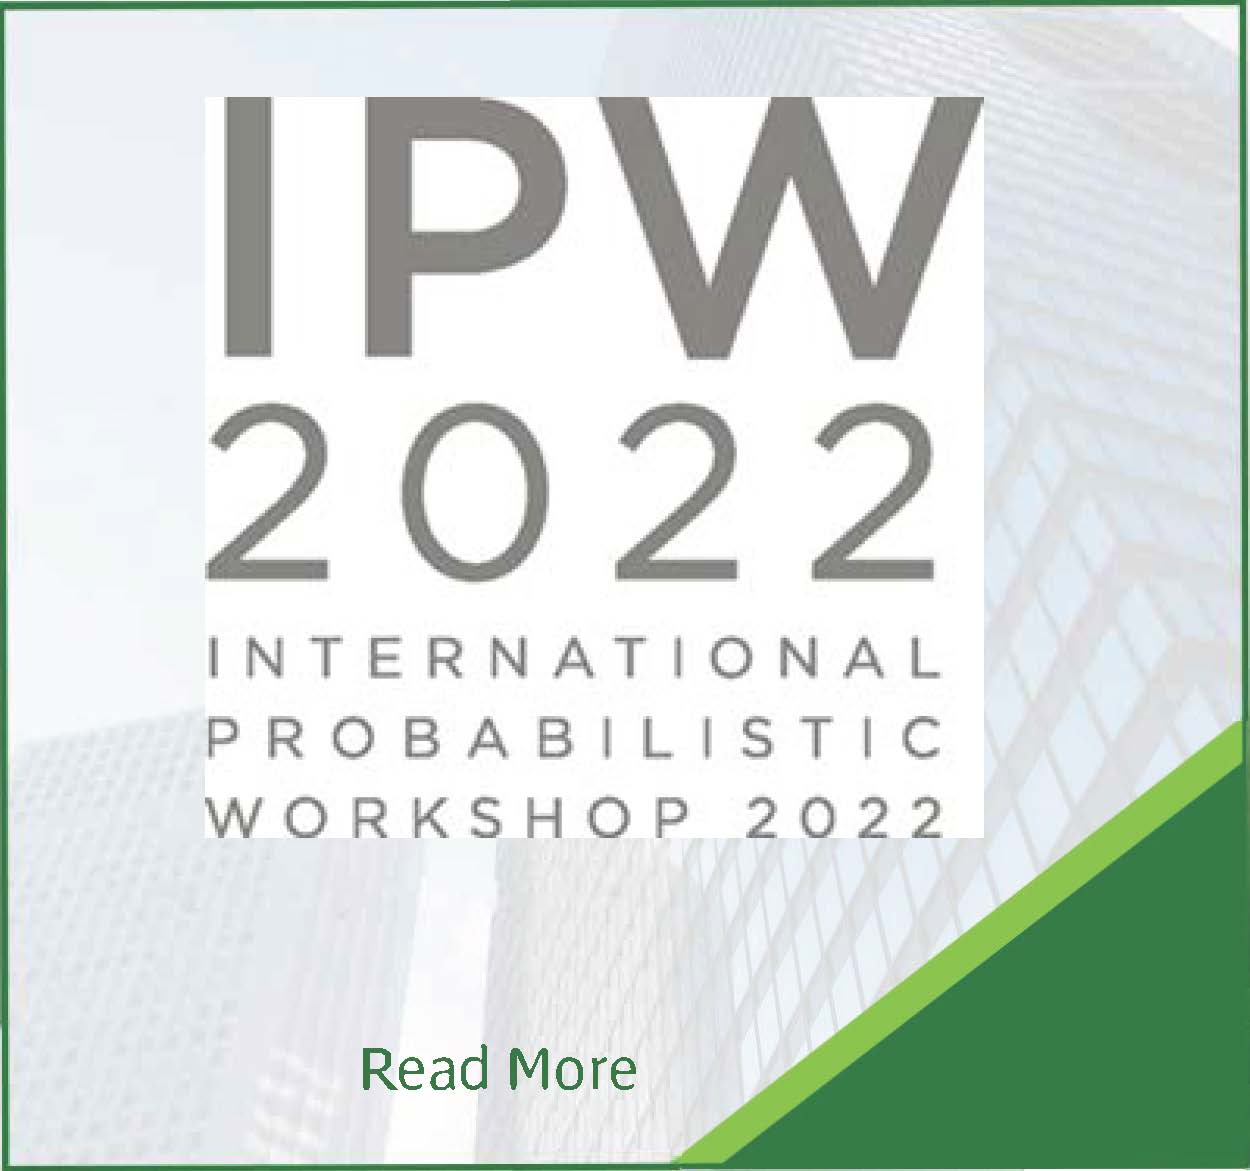 Call for Abstract – International Probabilistic Workshop 2022